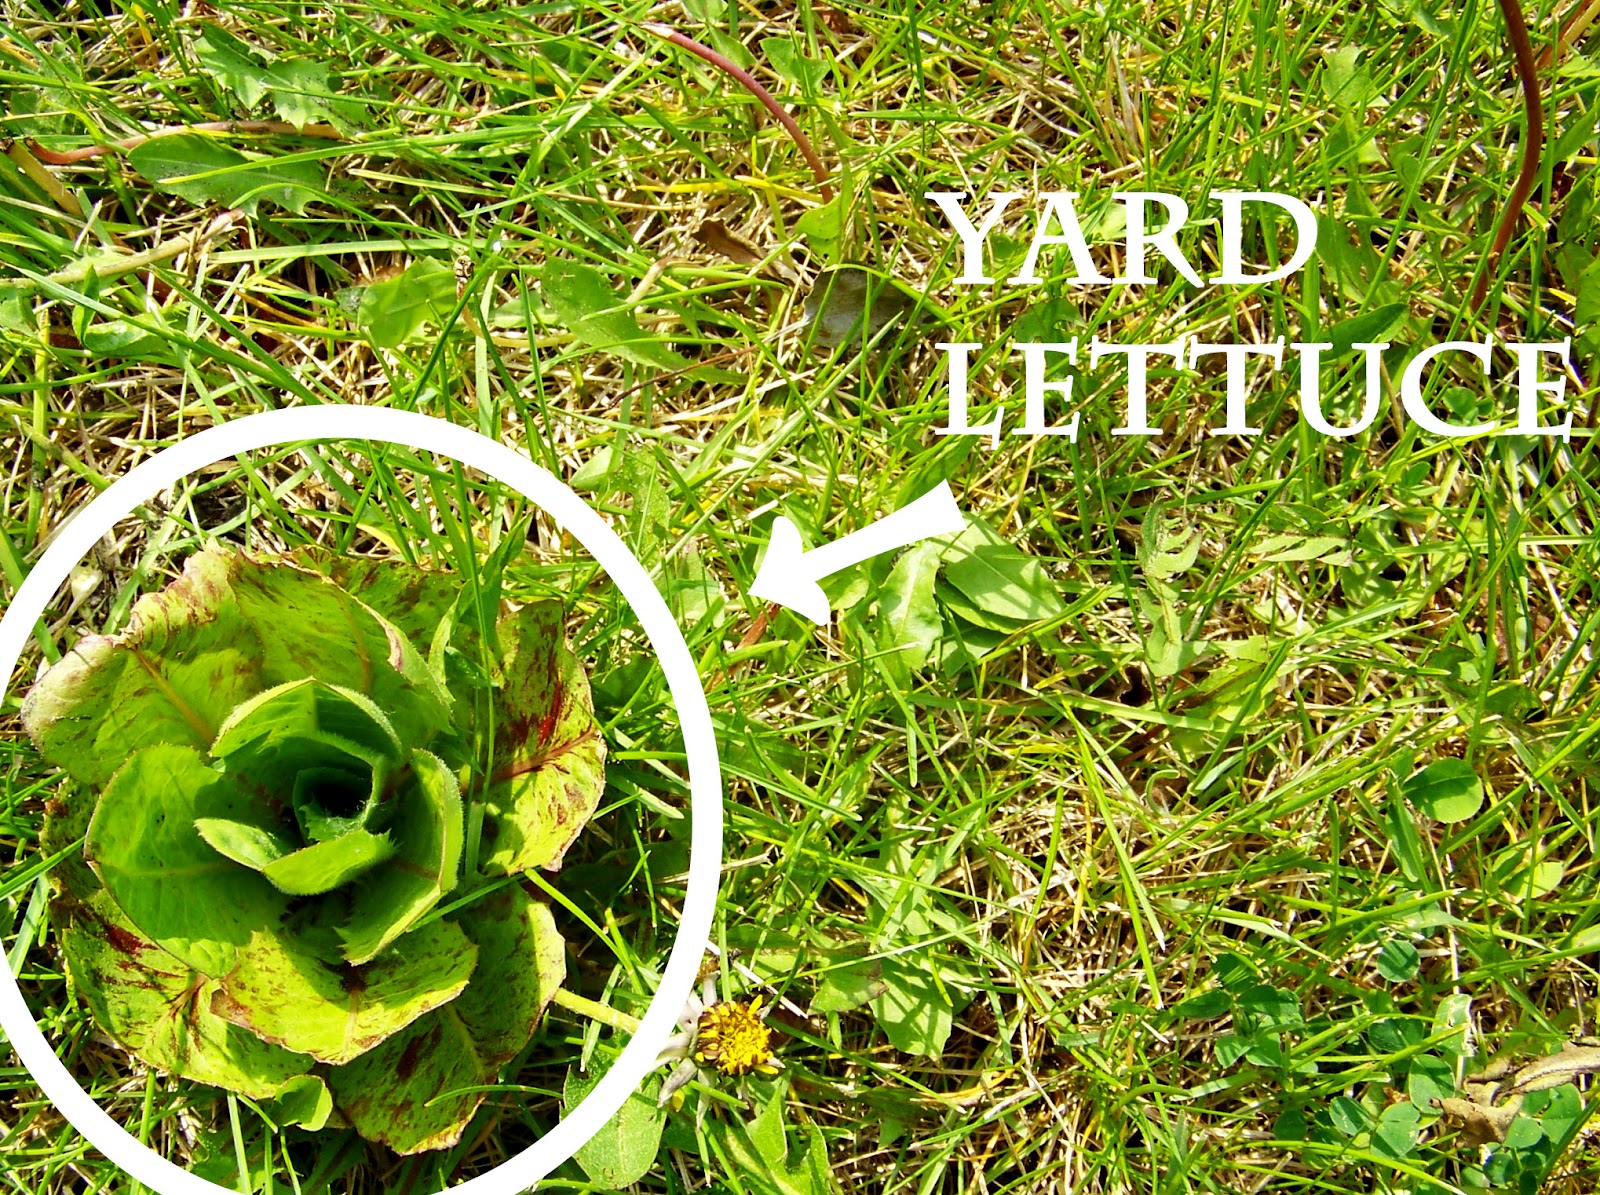 Calling All Odd Ducks: Topic of the Day: Yard Lettuce